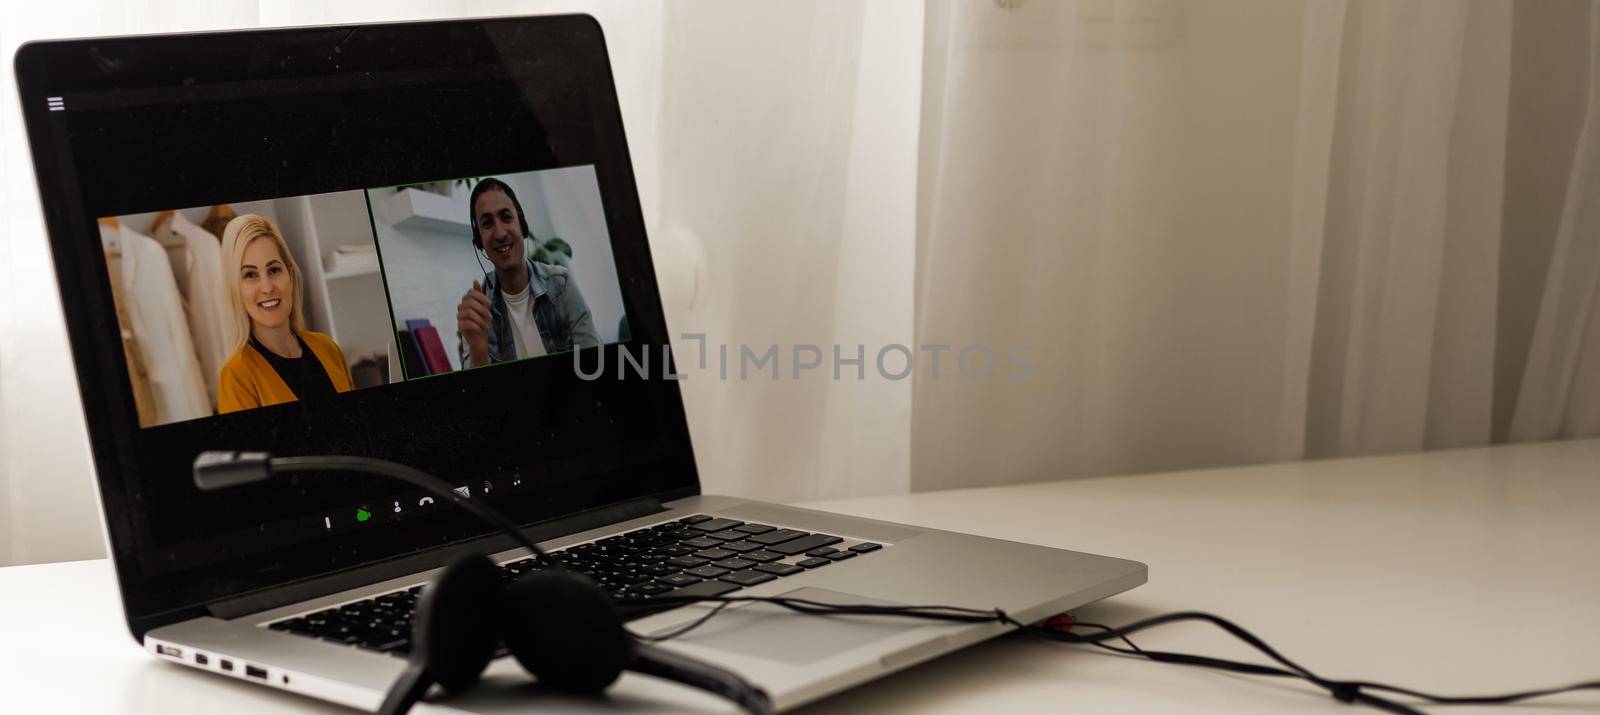 Teacher Hosting Online Class Using Video Conference On Laptop by Andelov13